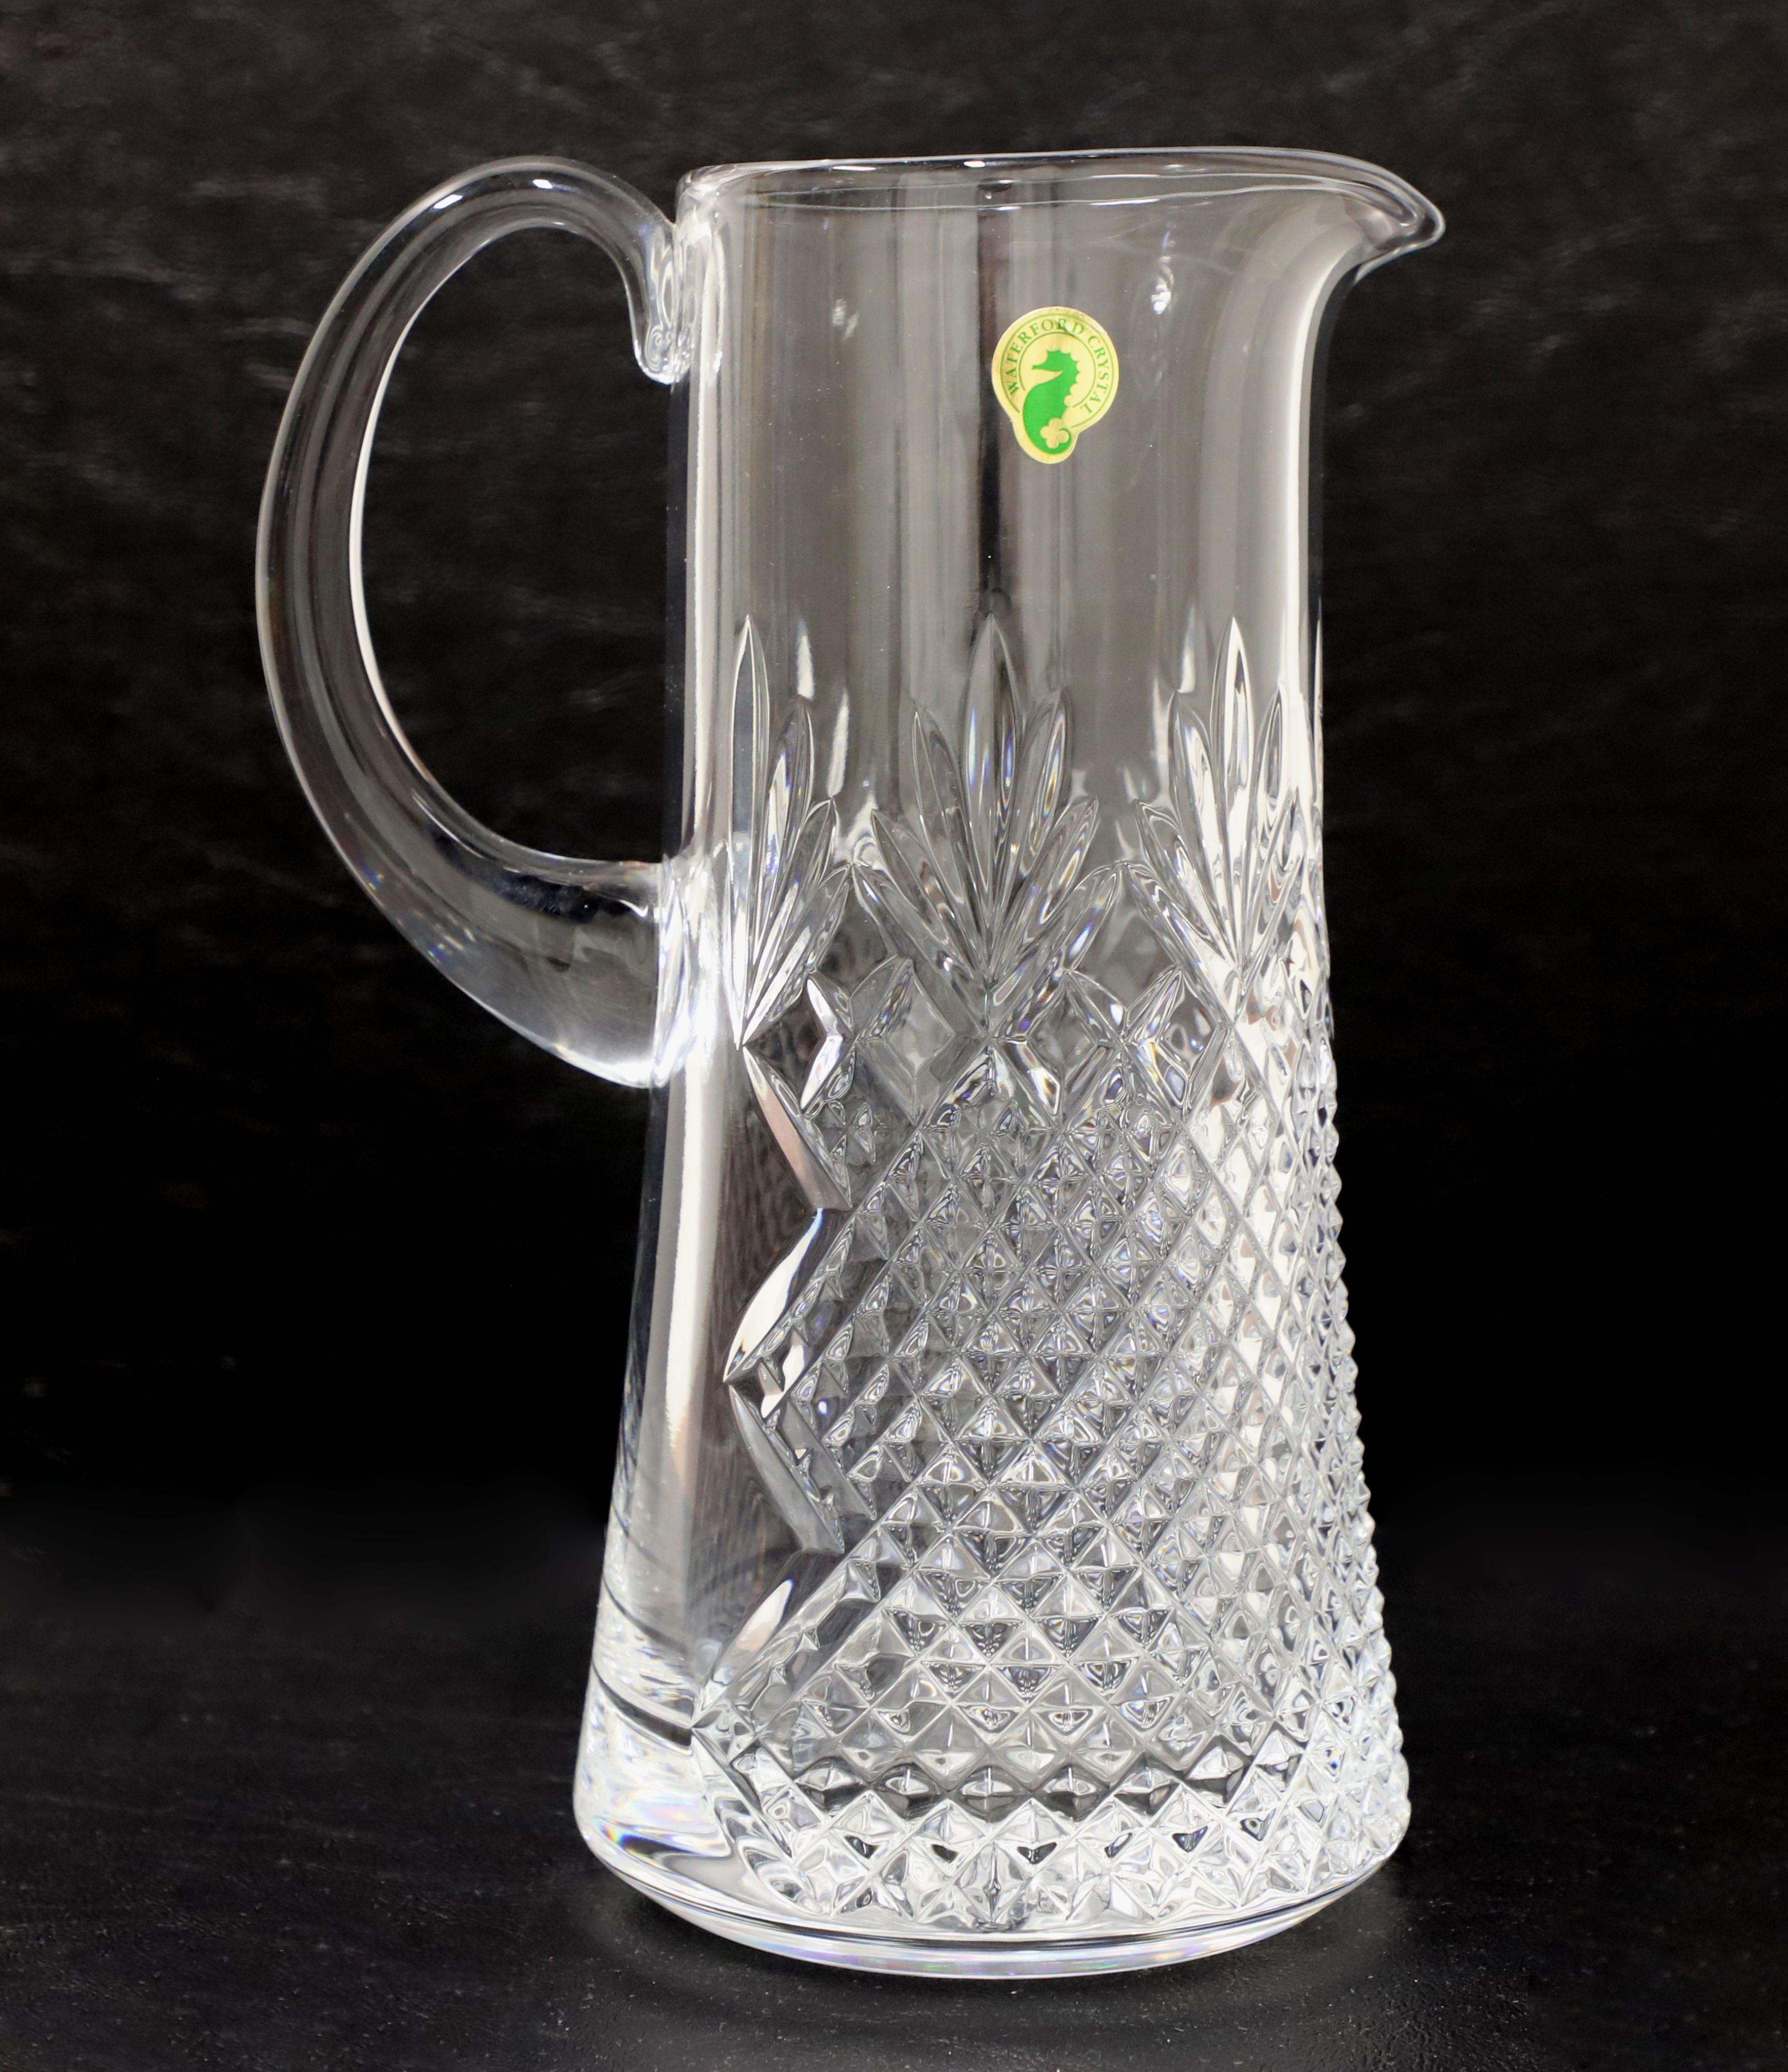 An Early 21st Century pitcher by Waterford, their 